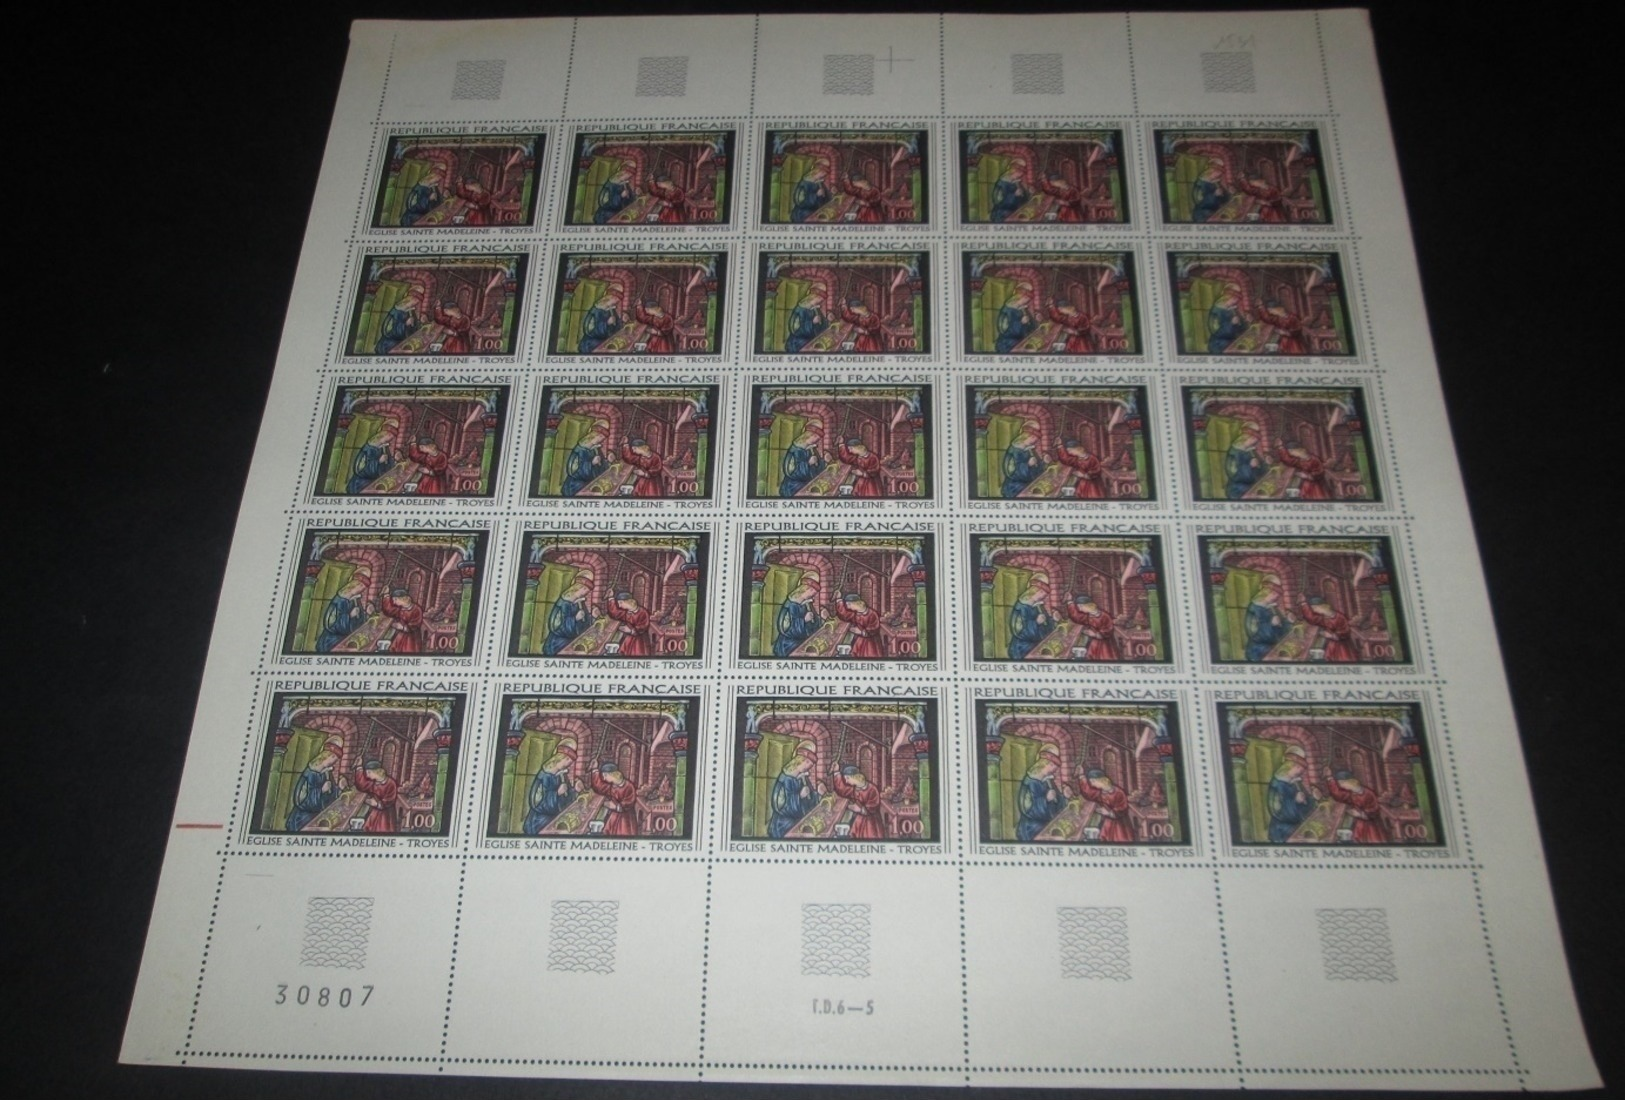 France 1967 Neuf** N° 1531 Tableau église Ste Madeleine Troyes Feuille Complète (full Sheet) 25 Timbres - Full Sheets